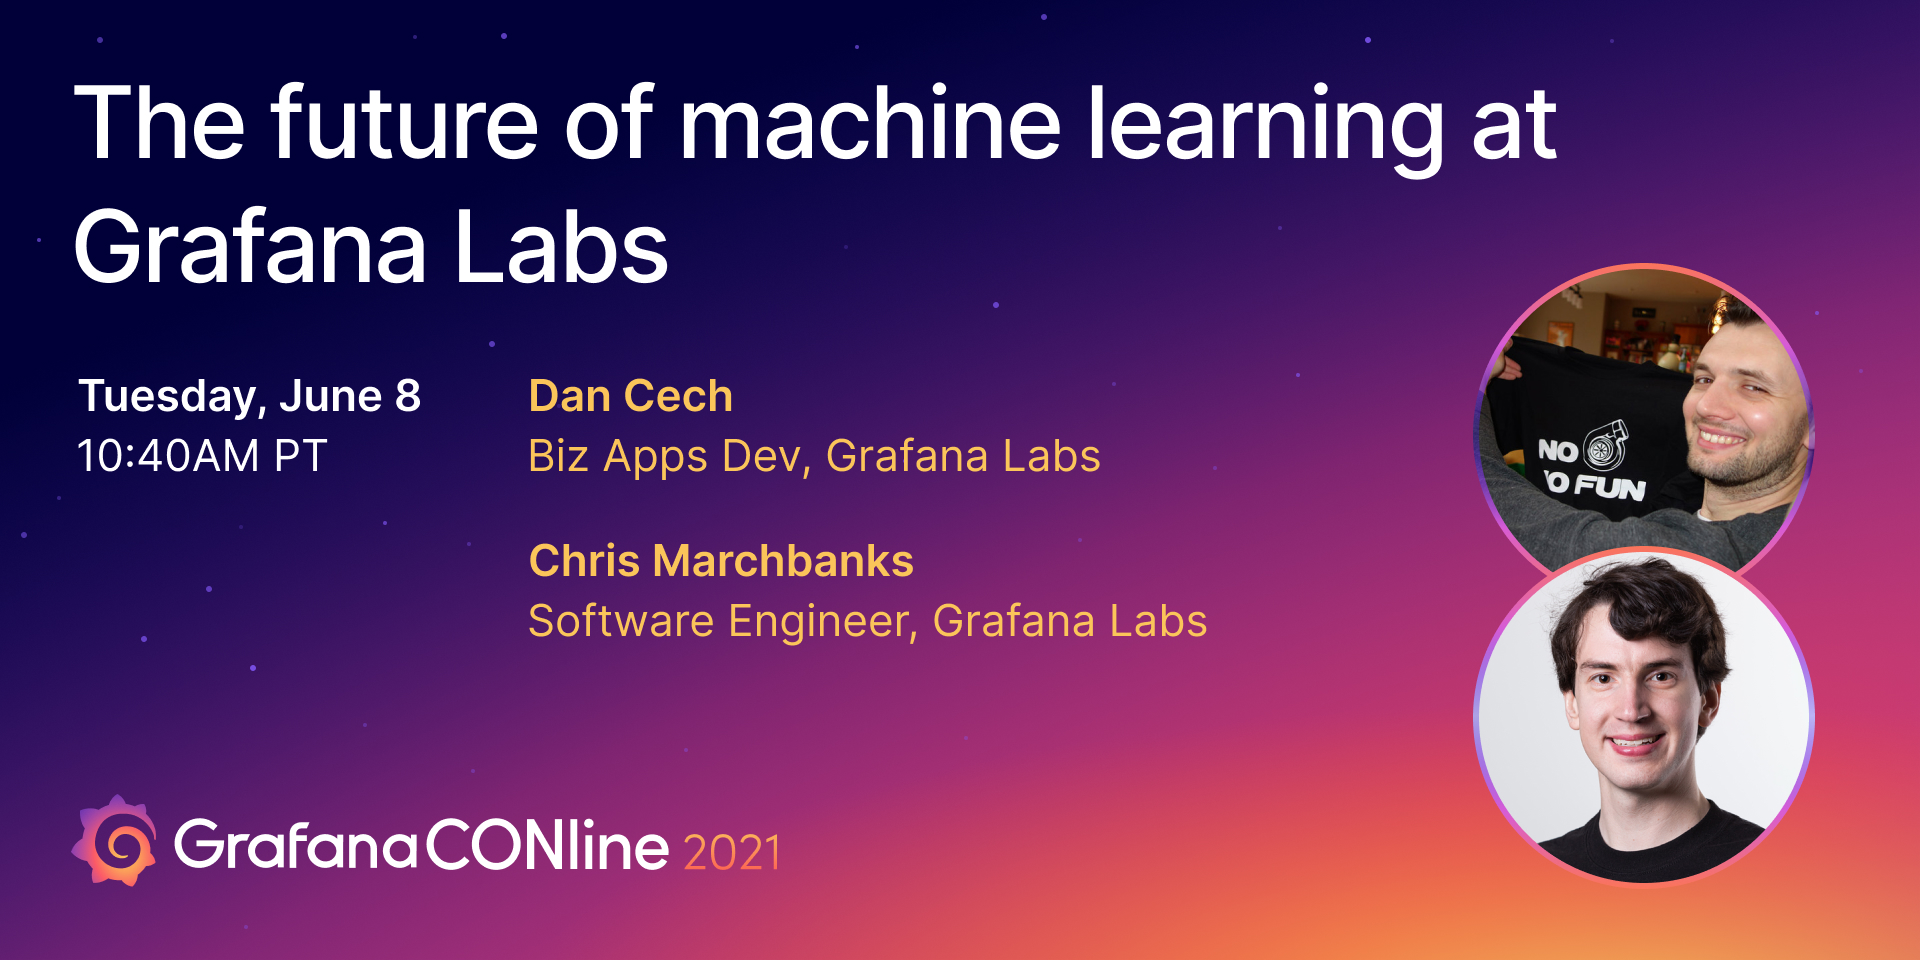 The future of machine learning at Grafana Labs